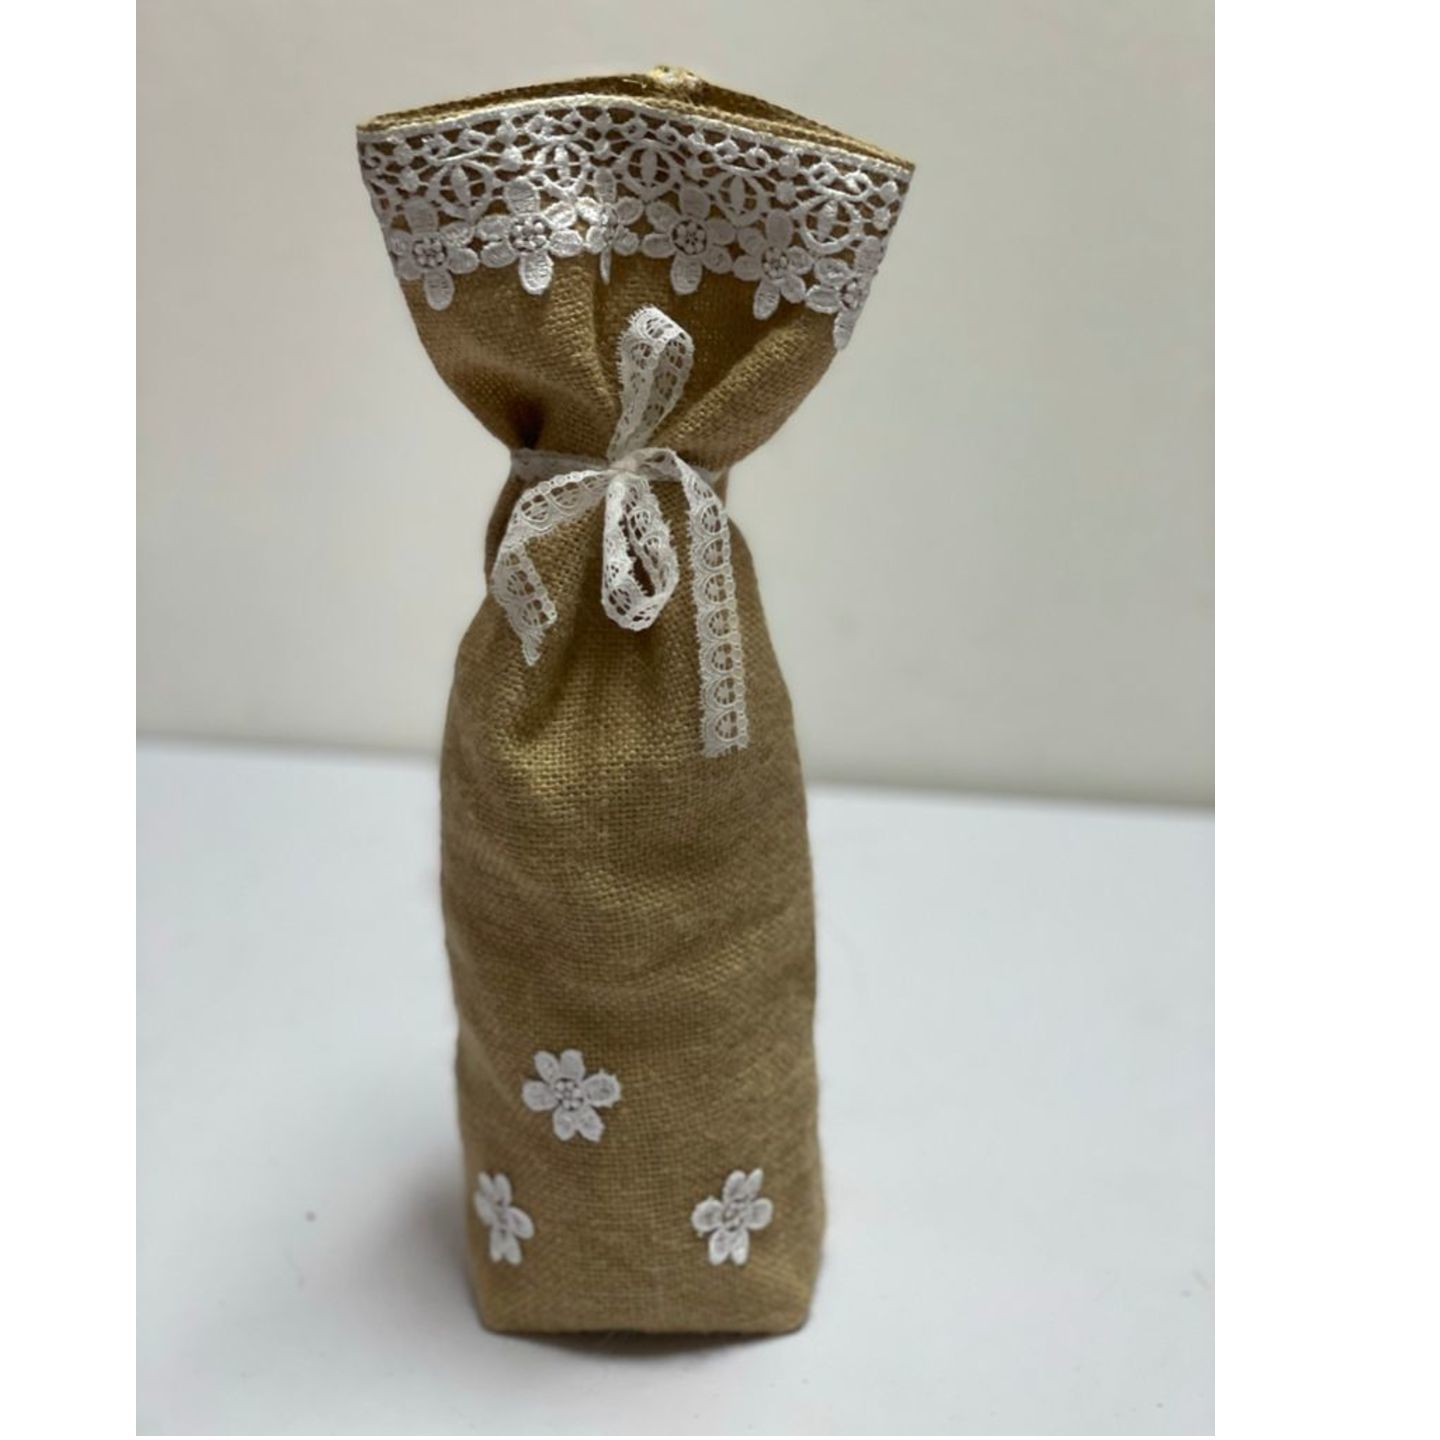 Burlap Bottle Cover with white lace